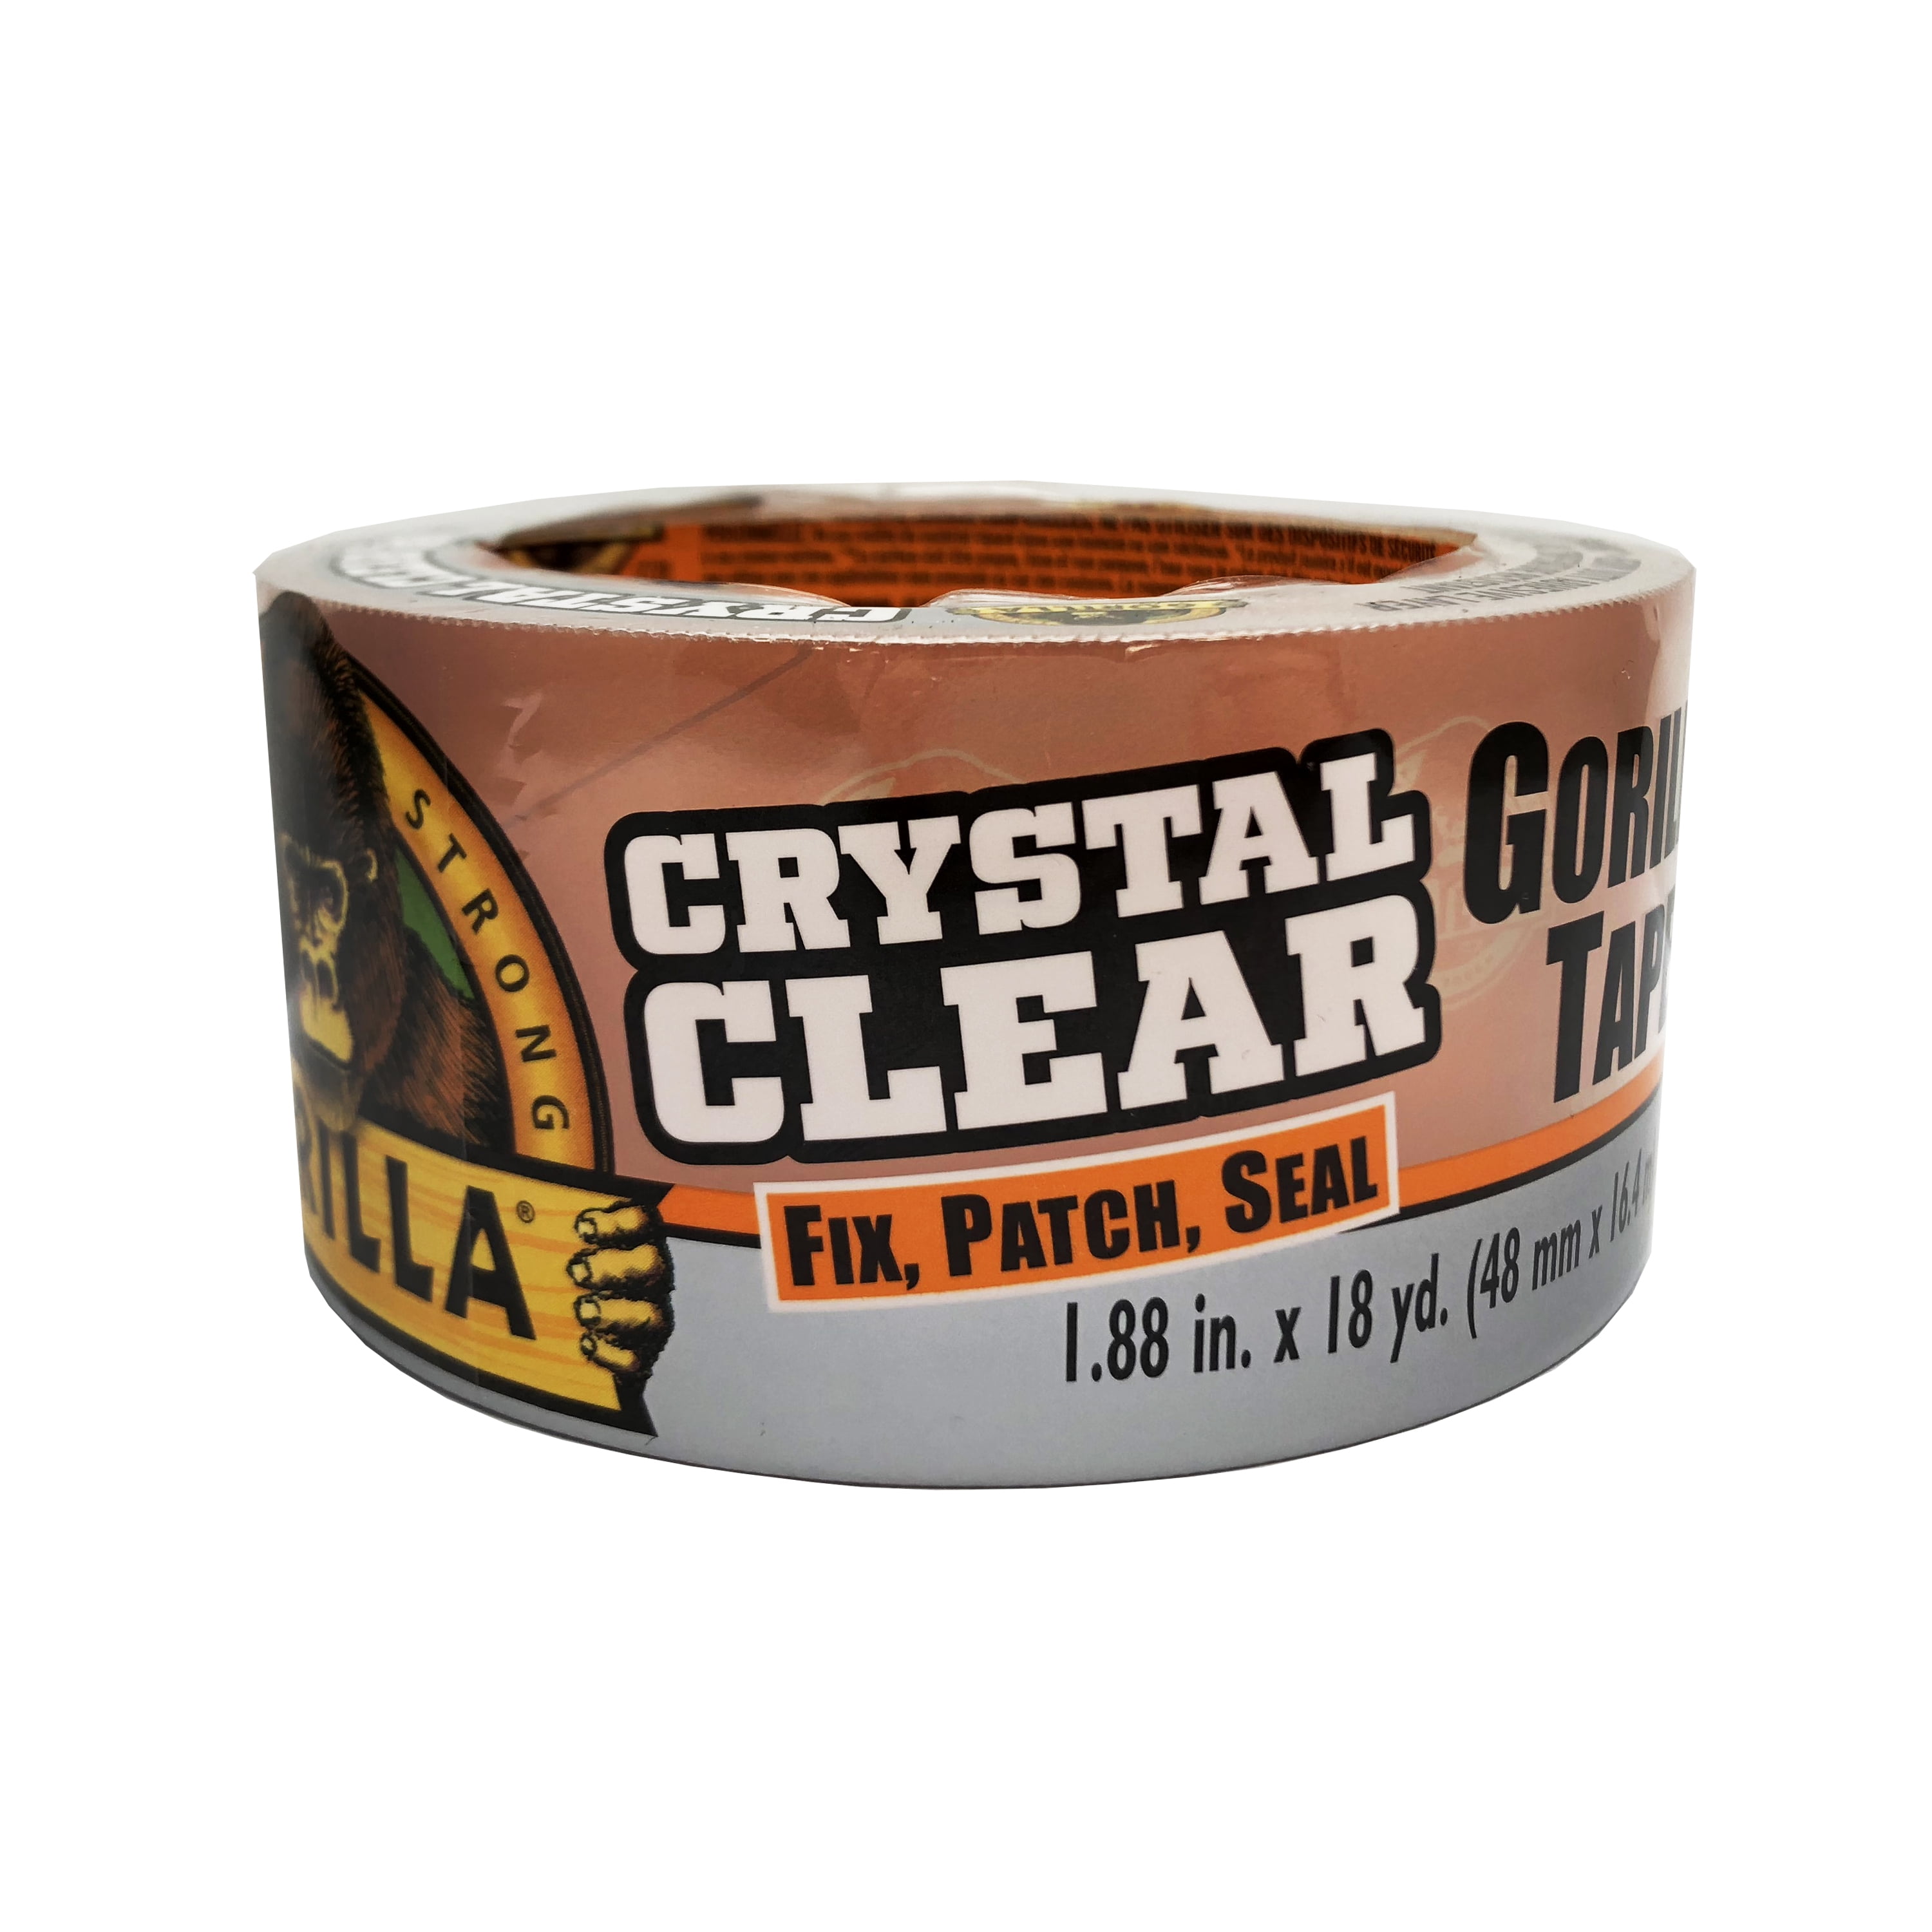 Pack of 1 Gorilla Crystal Clear Duct Tape 1.88” x 9 yd Clear, - 6027002 